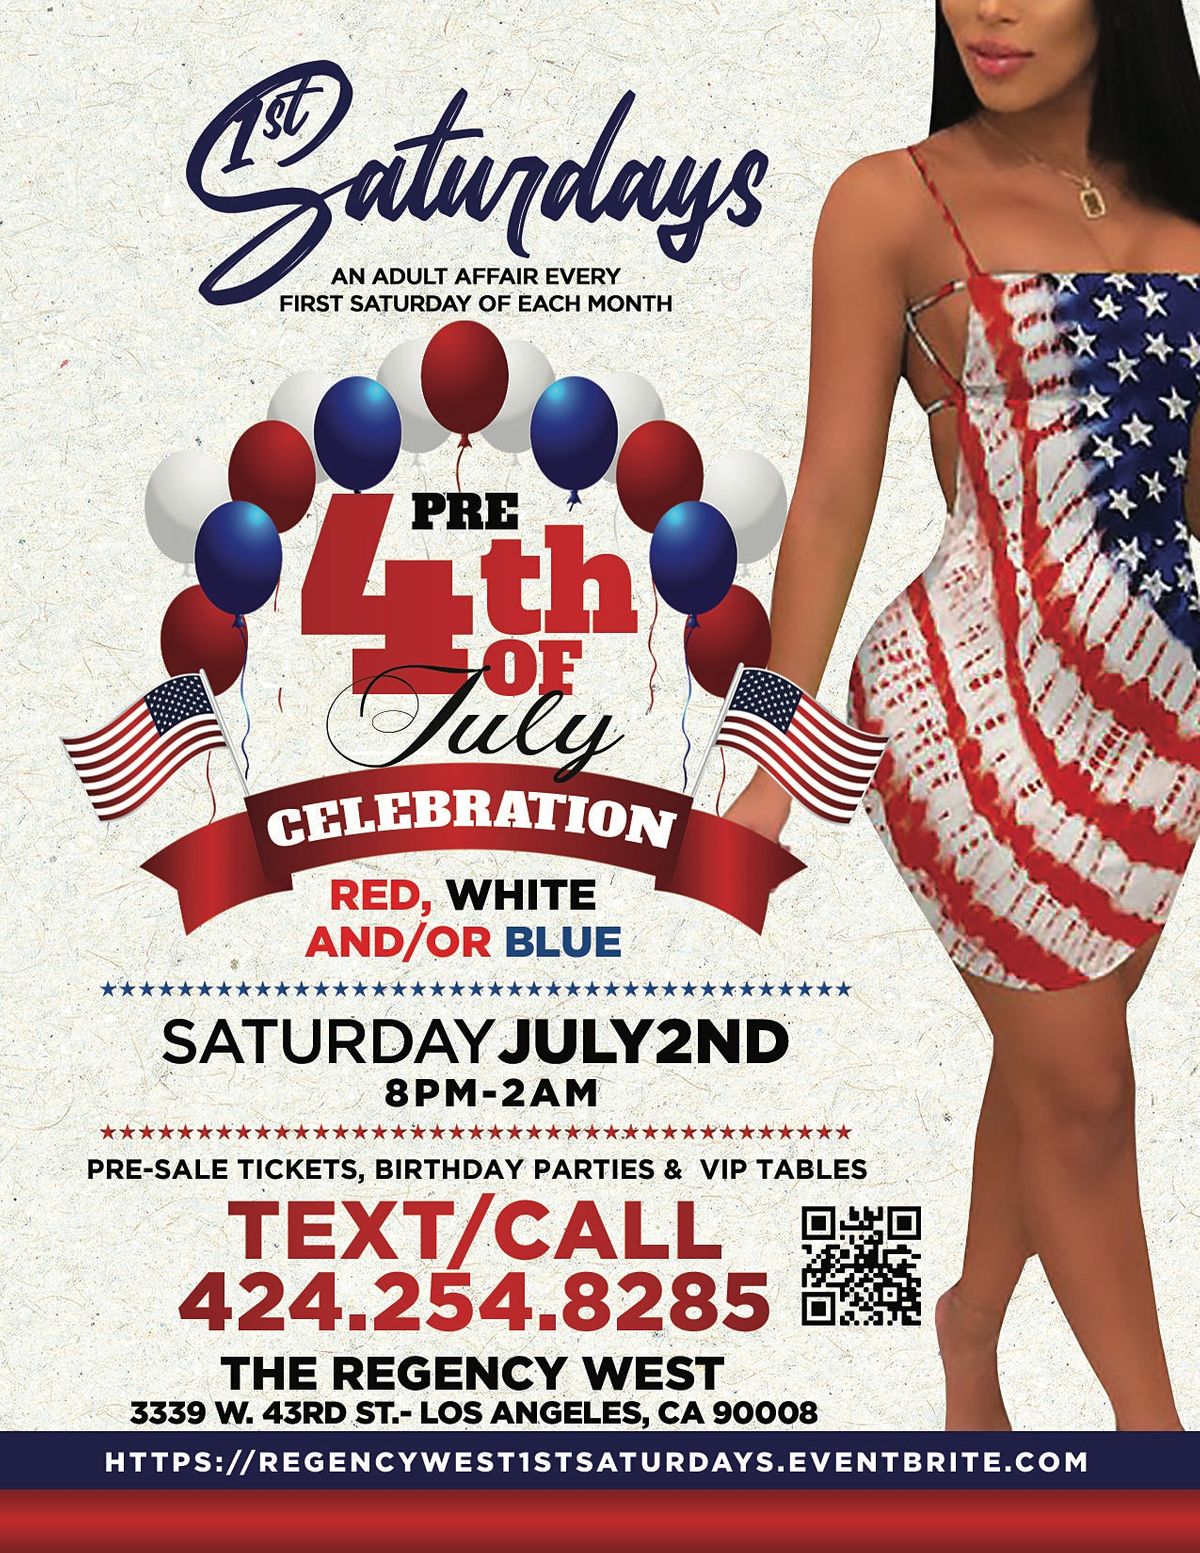 1ST Saturday's RED, WHITE and\/or BLUE AFFAIR  @ Regency West